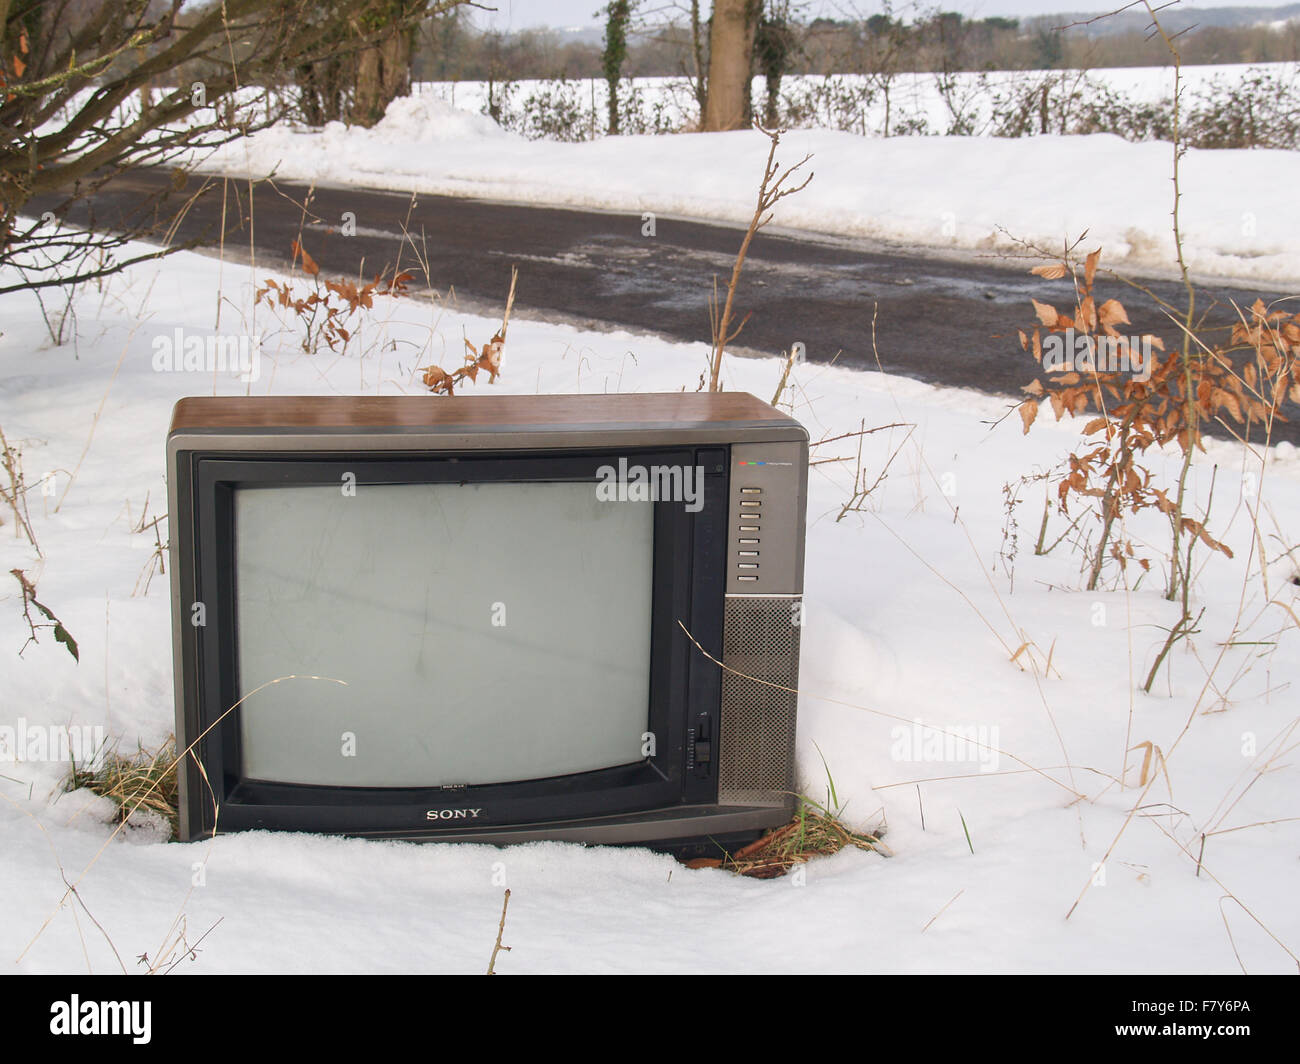 A television set left abandoned at the side of a country road in deep white snow in Wiltshire, UK Stock Photo